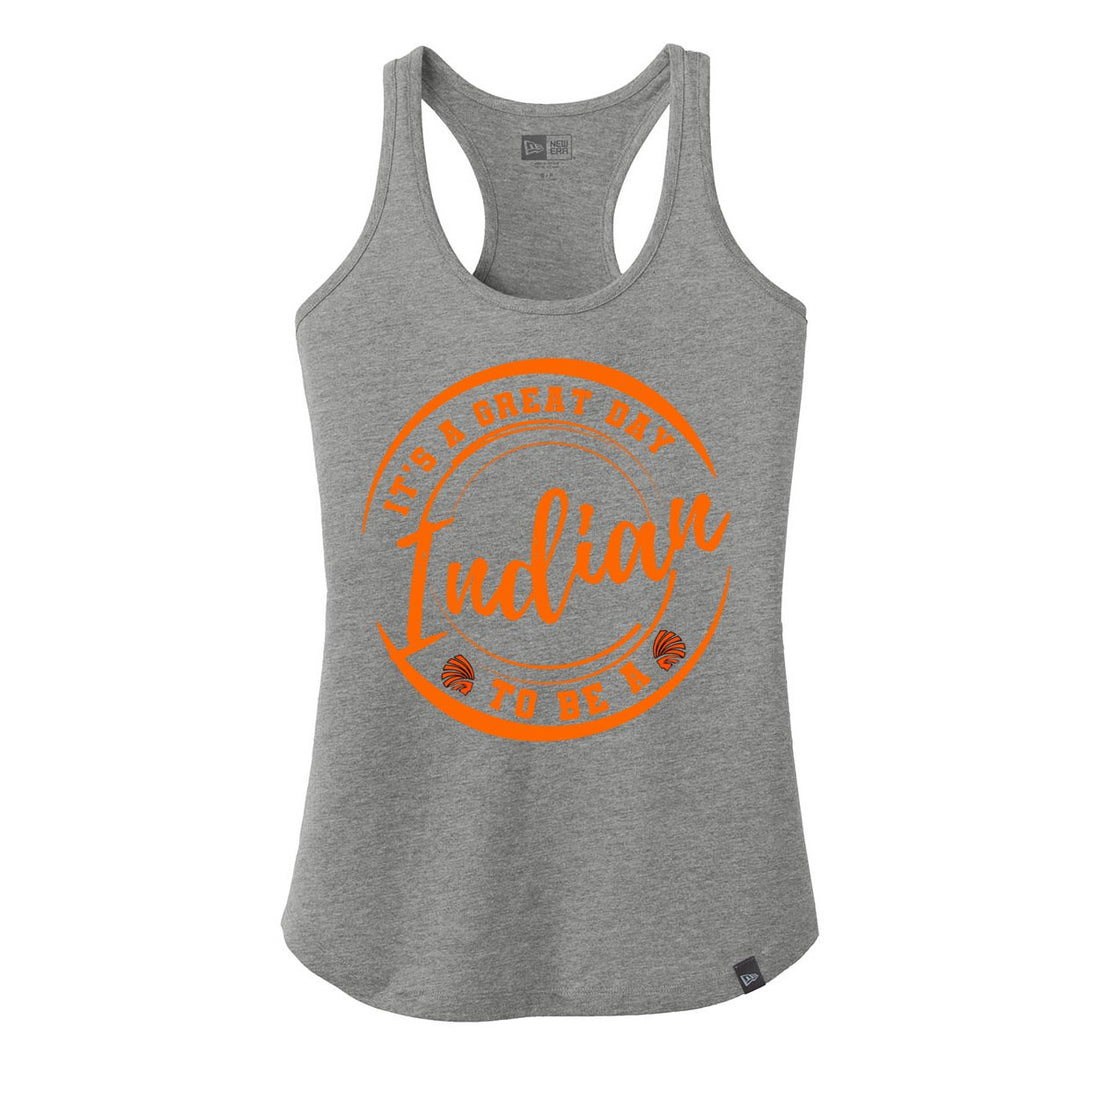 Great Day to be a Indian Racerback Tank - Tank Tops - Positively Sassy - Great Day to be a Indian Racerback Tank